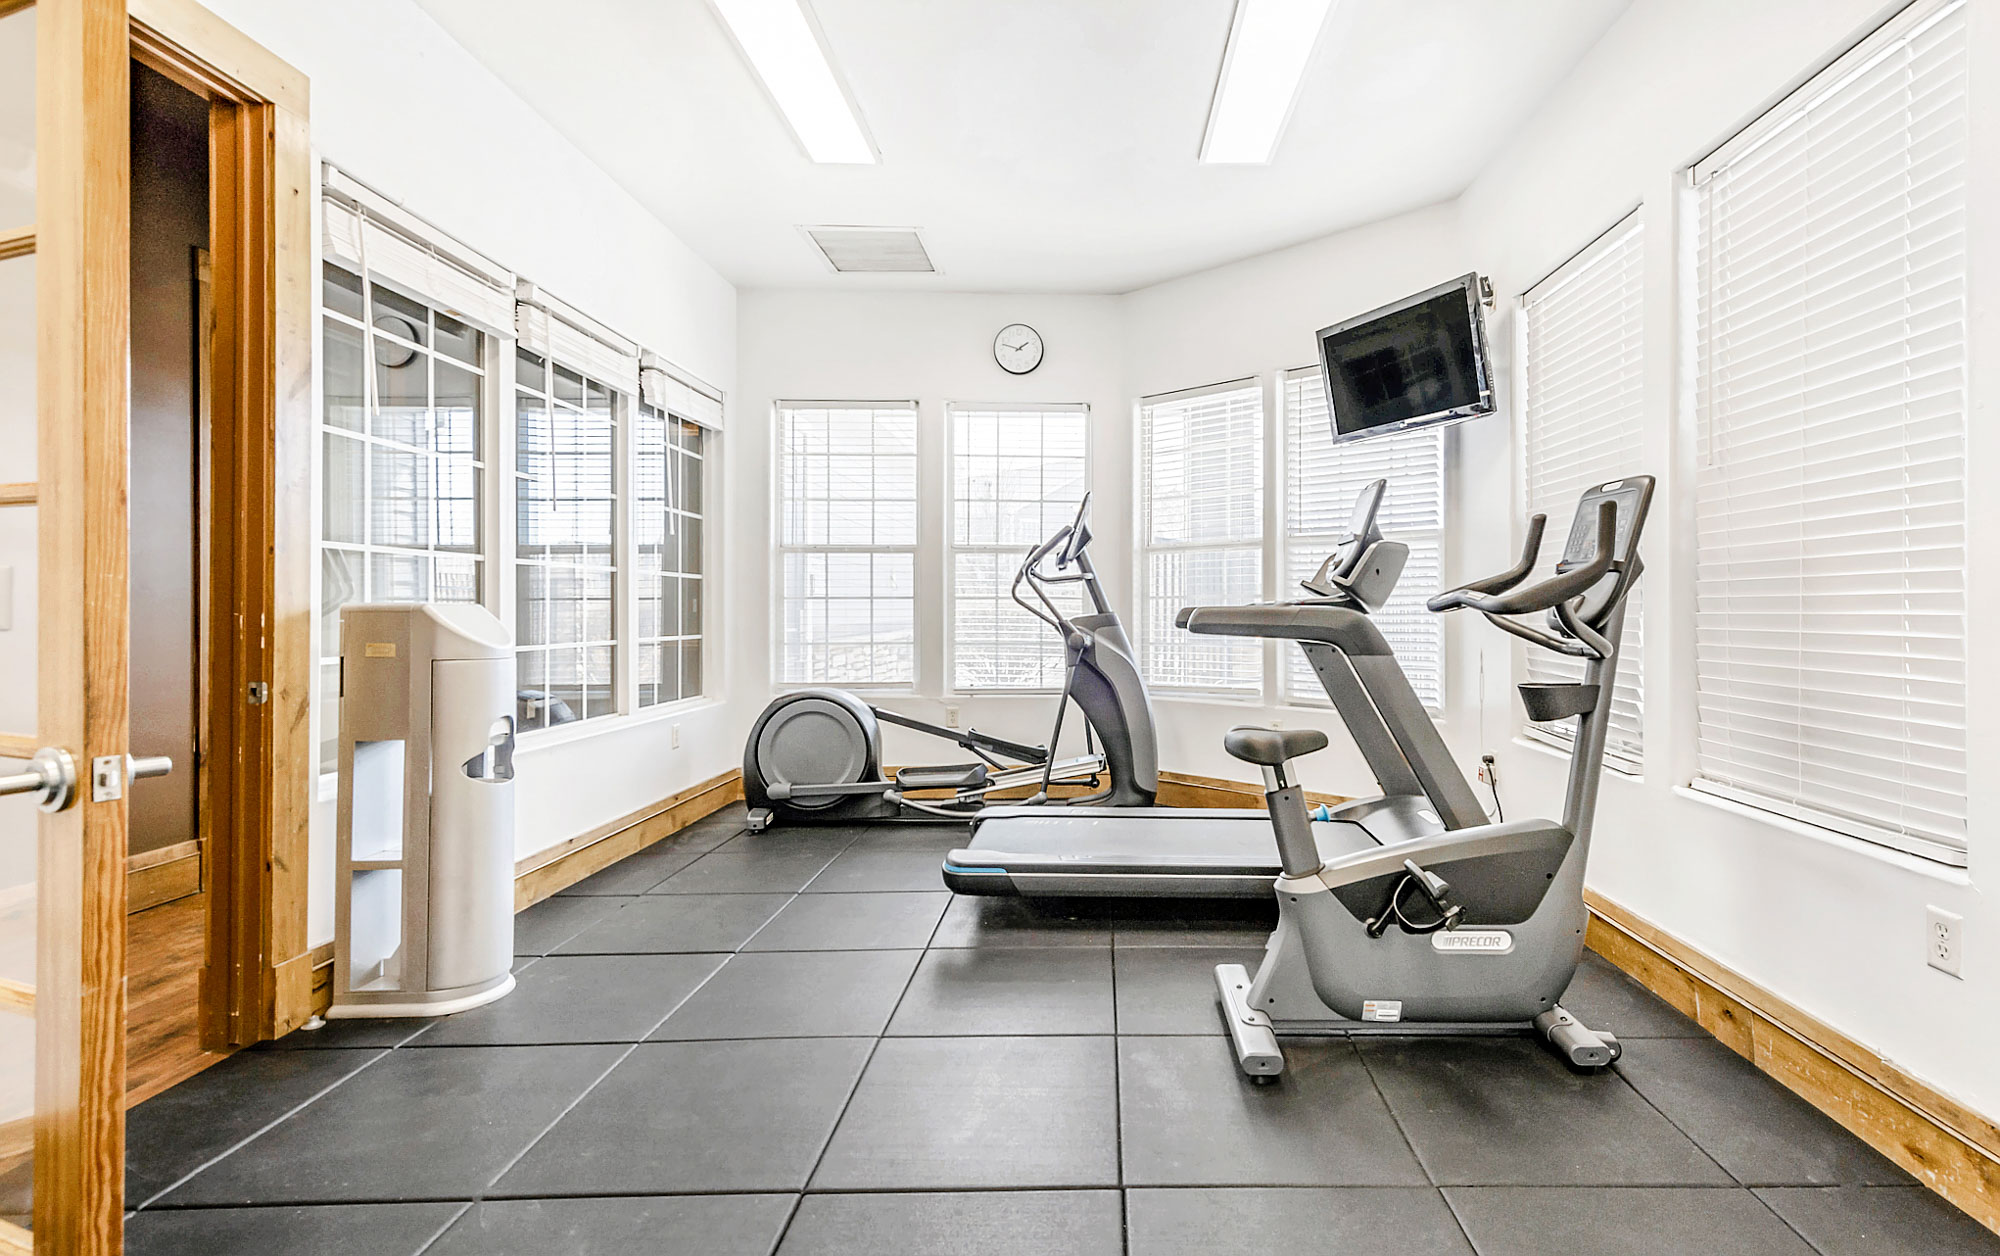 The fitness center at Eagle Ridge apartments in Denver, CO.